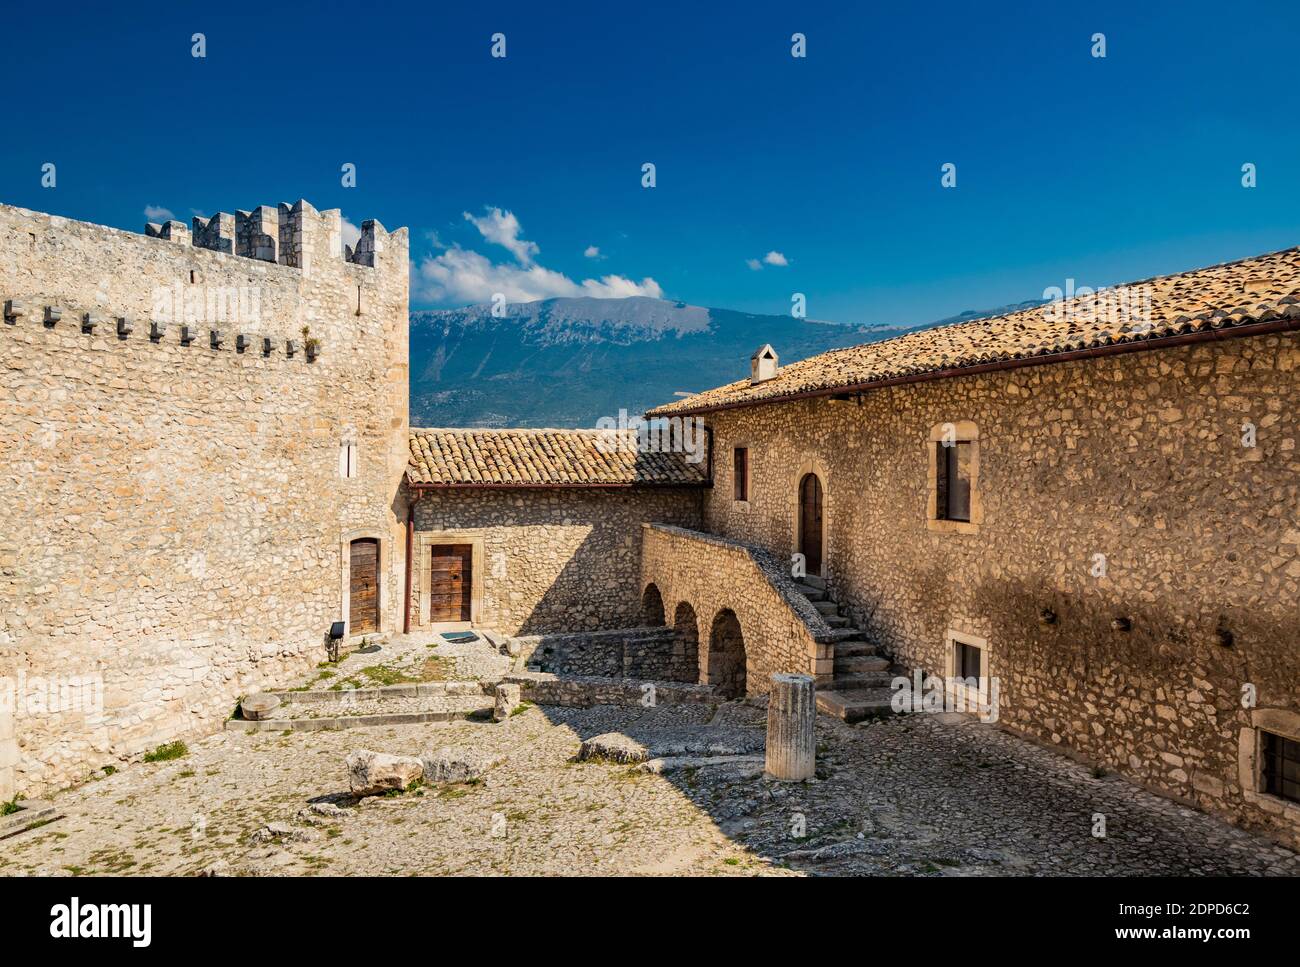 September 13, 2020 - Capestrano, Abruzzo, Italy - The courtyard of the ancient medieval castle, with the high tower, the defensive brick walls, the st Stock Photo